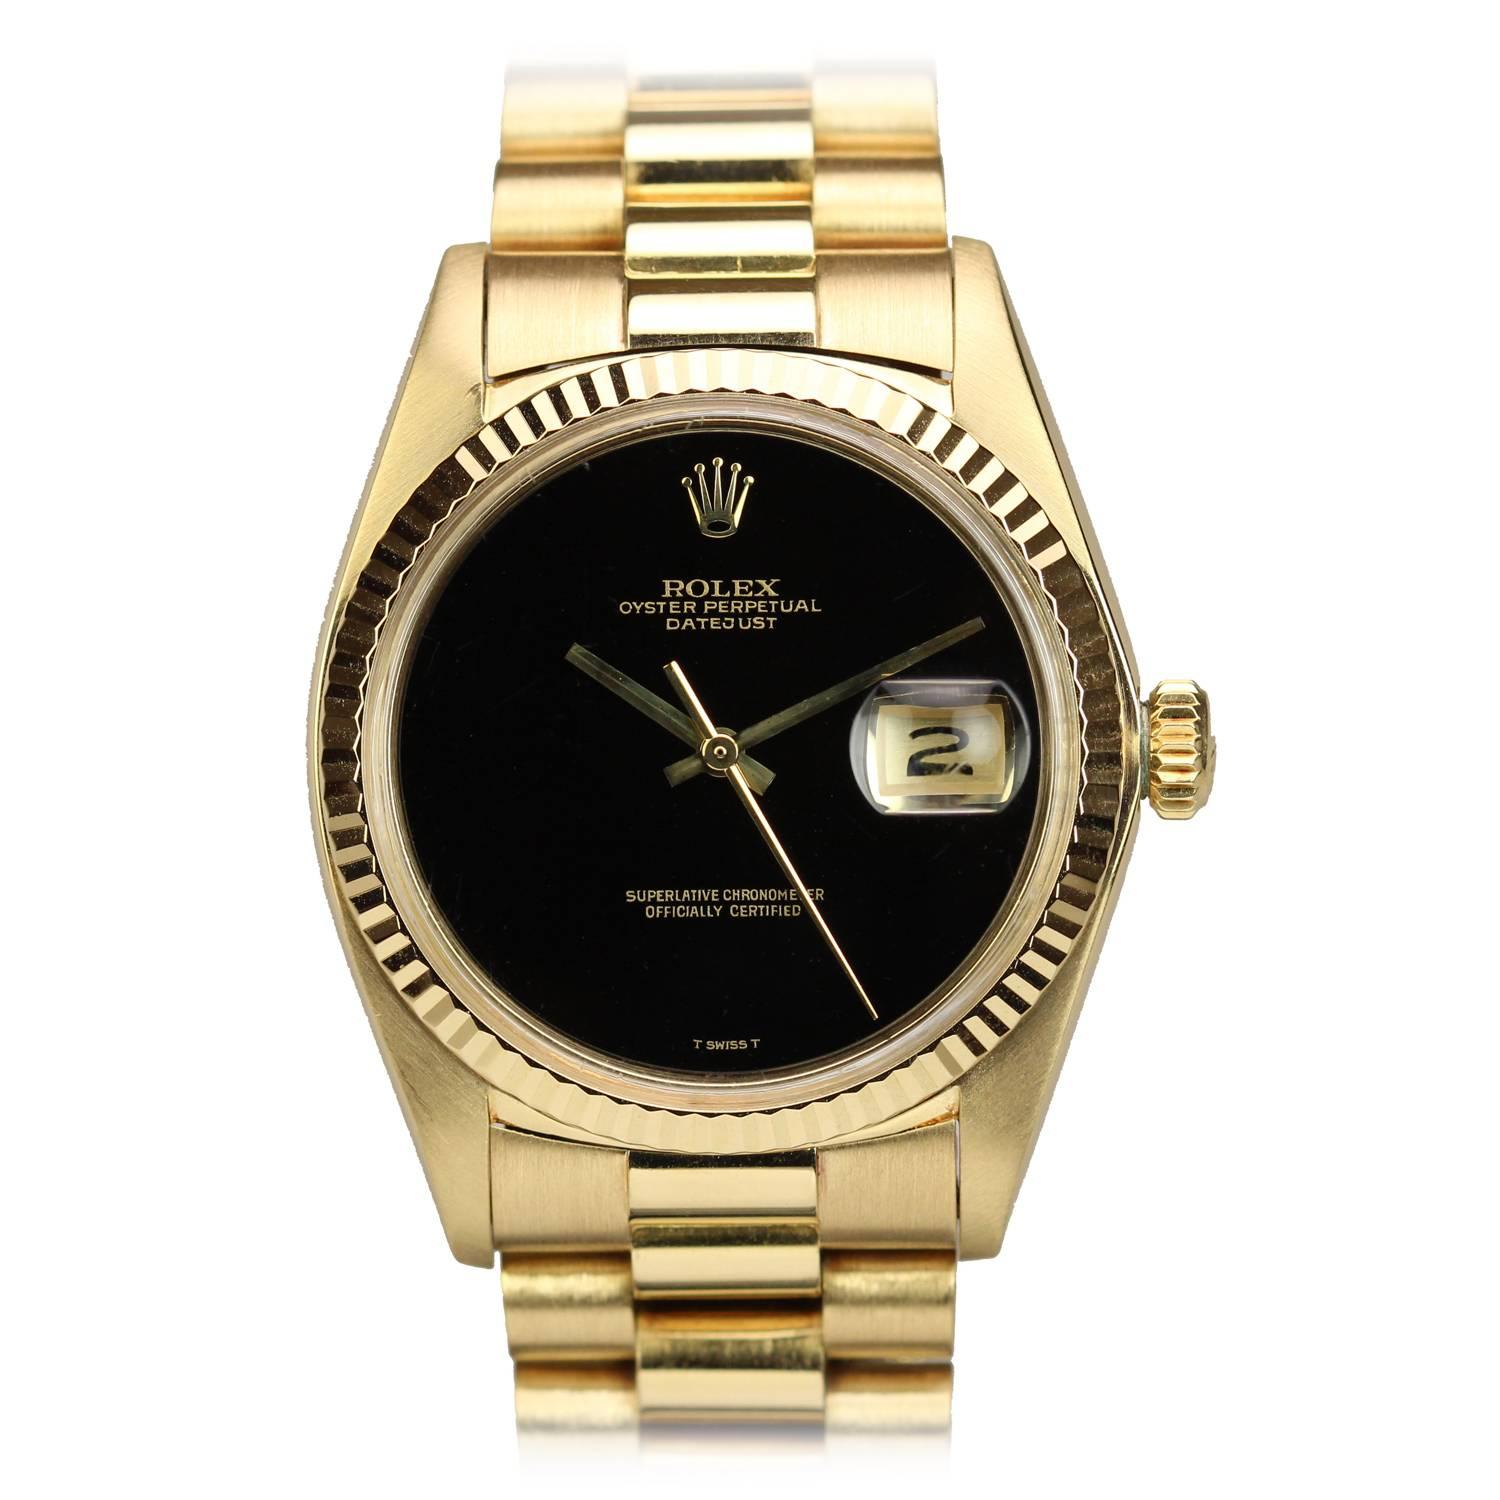 Rolex Datejust with Onyx Dial Ref 1601 c. 1977